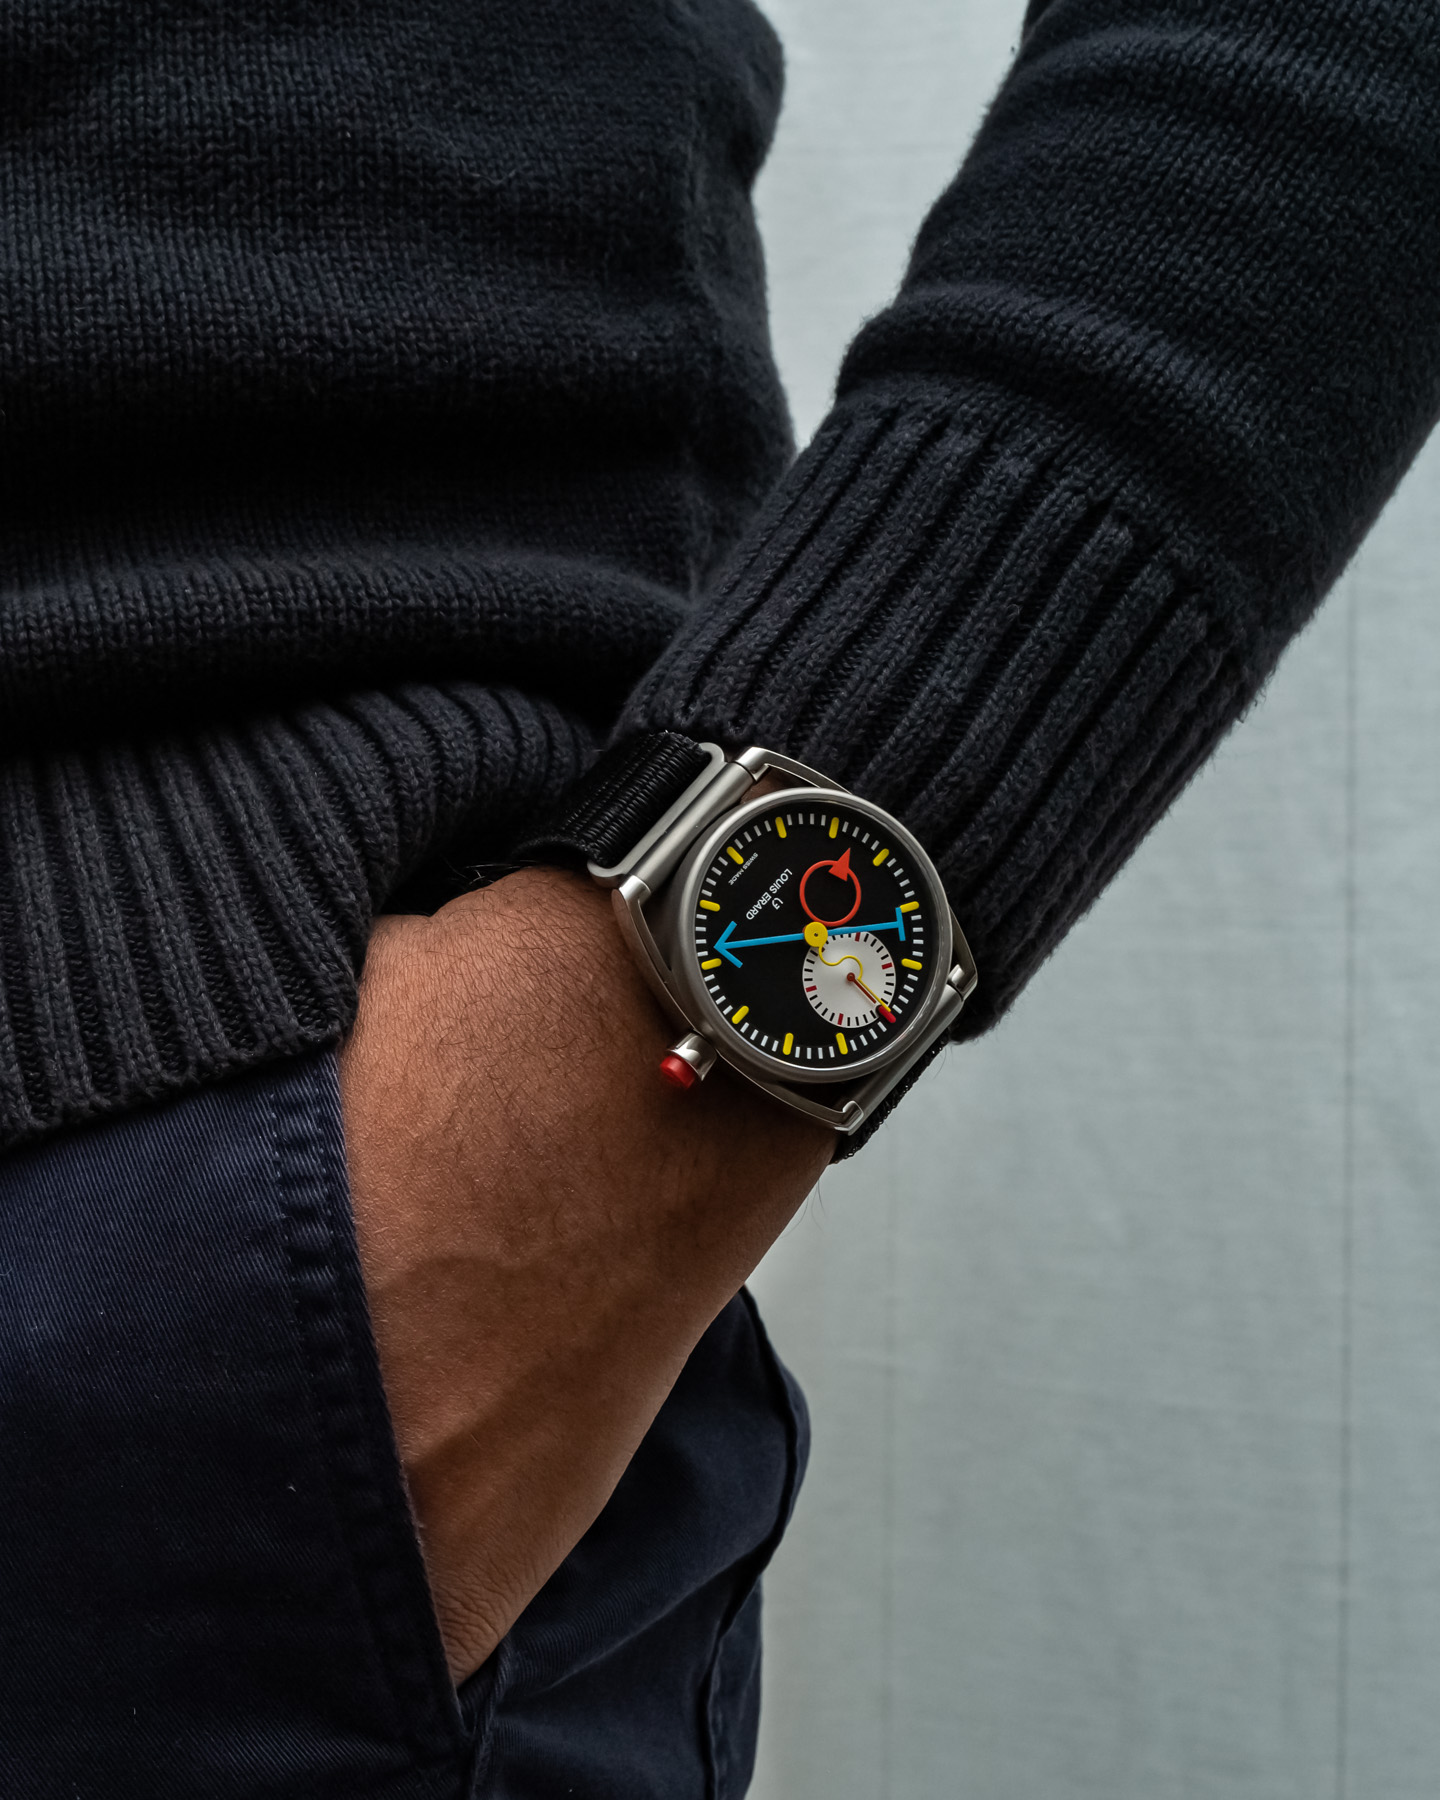 Louis Erard x Alain Silberstein Release 'Triptych' Of New Limited-Edition  Watches